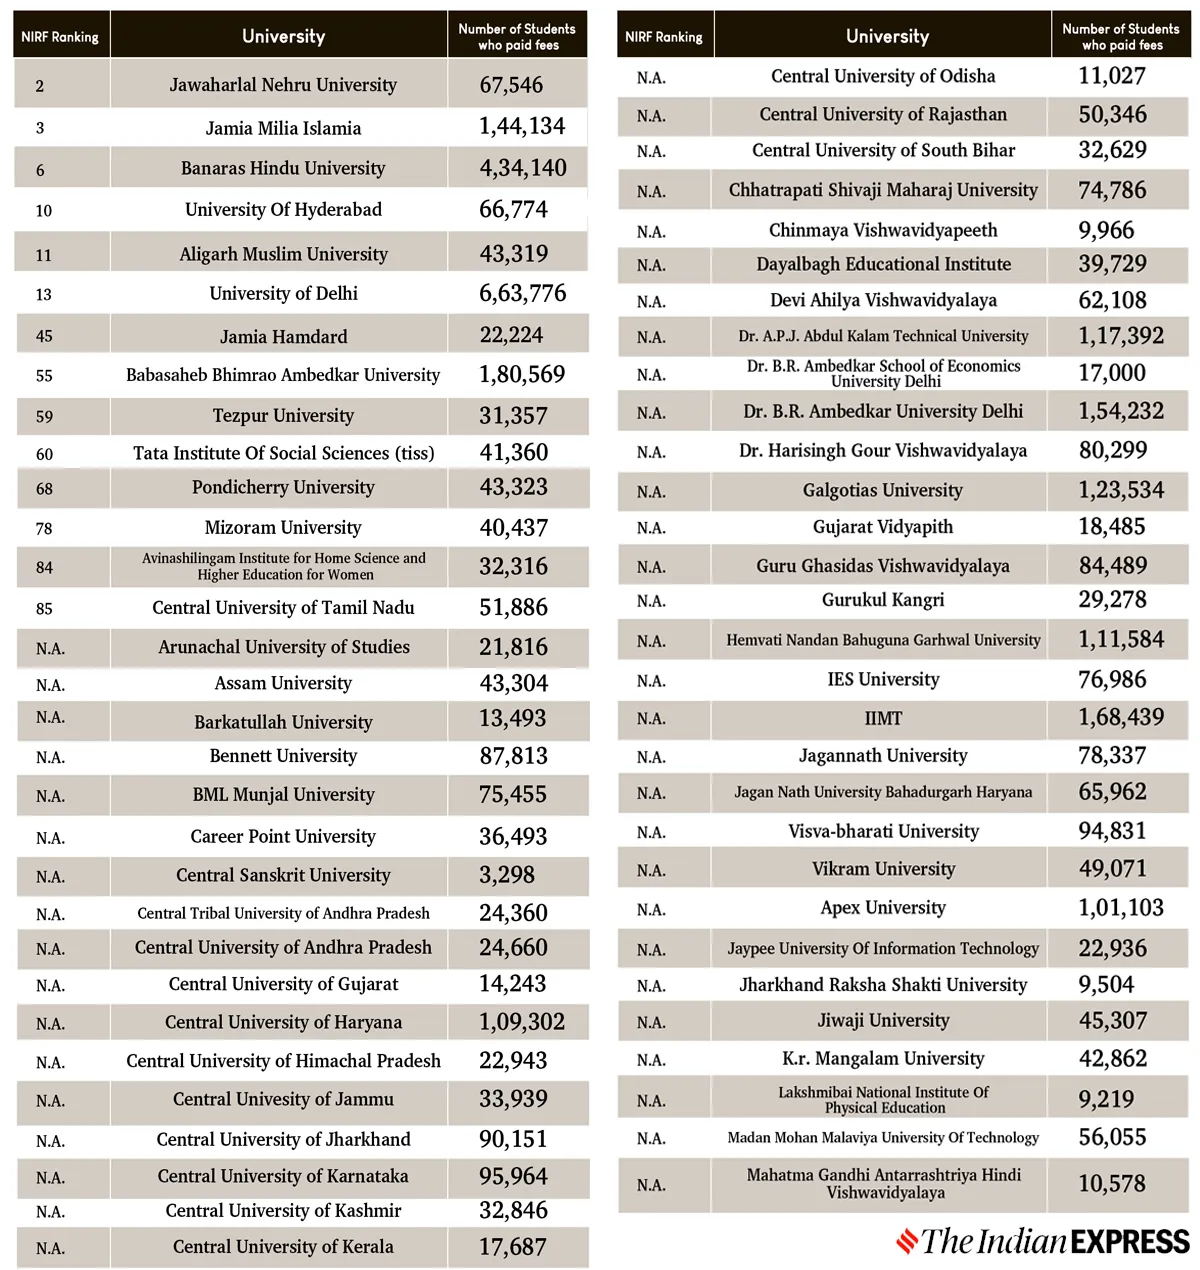 Here’s the list of universities covered under CUET 2022, their ranking